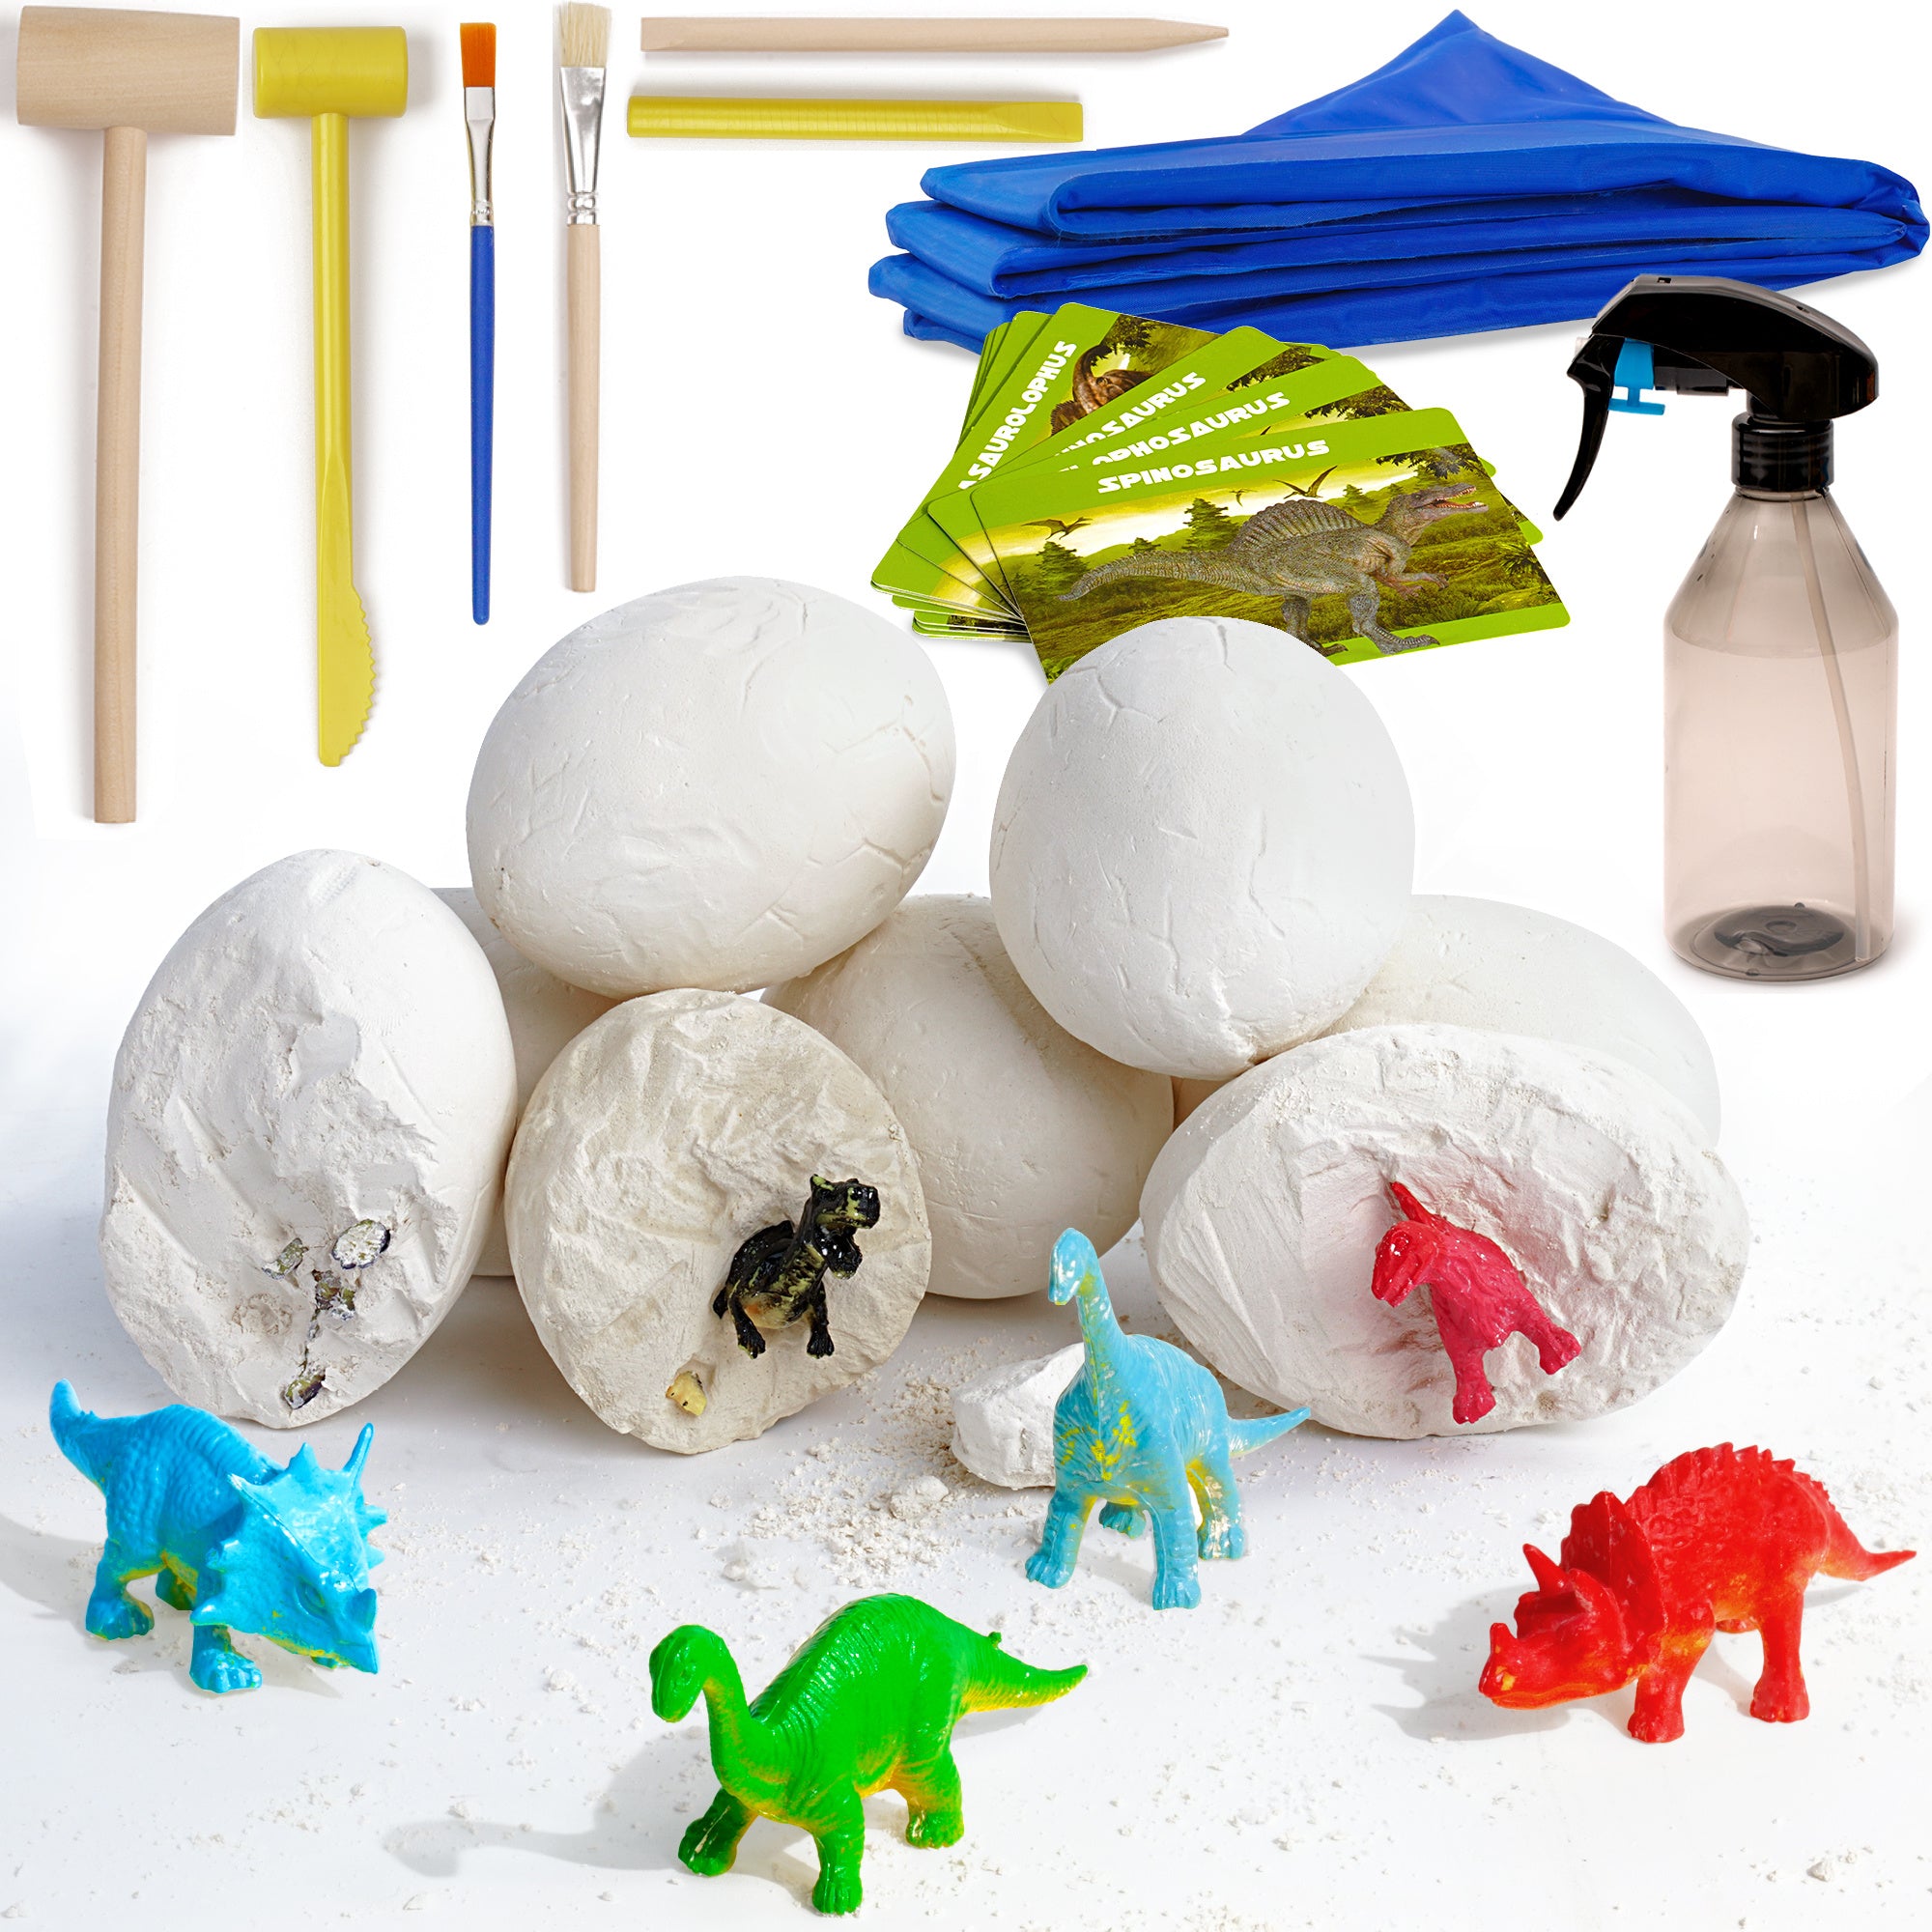 Robotime 12 Pcs Dino Eggs With 2 Sets of Tools Creative Toys For Kids Children DIY Home